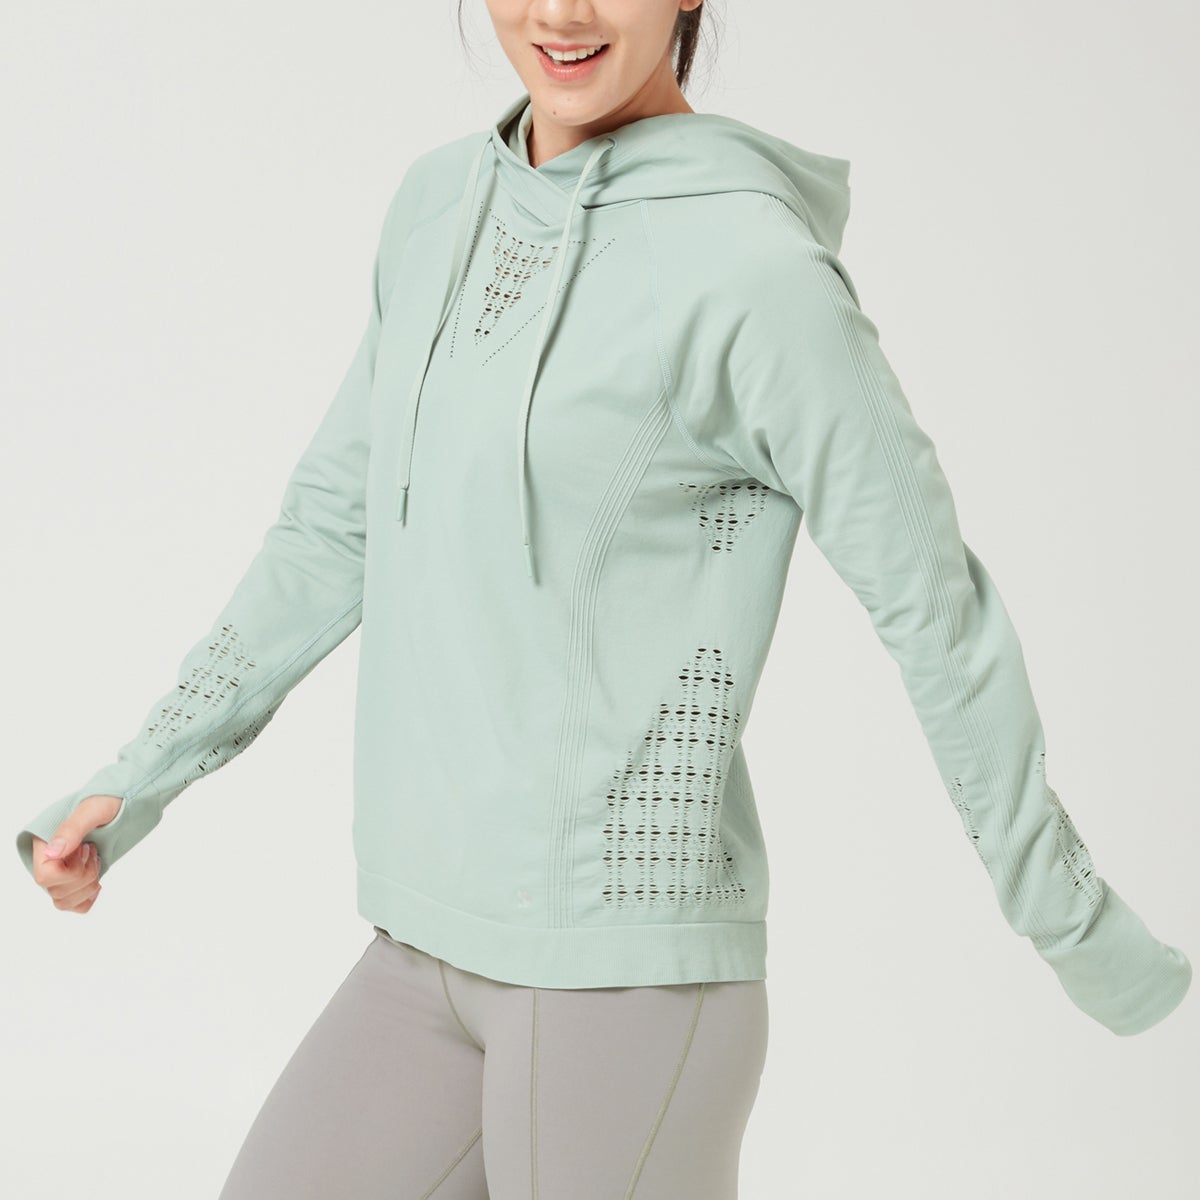 Liftstyle Seamless Hoodie Tops Sweat Float 